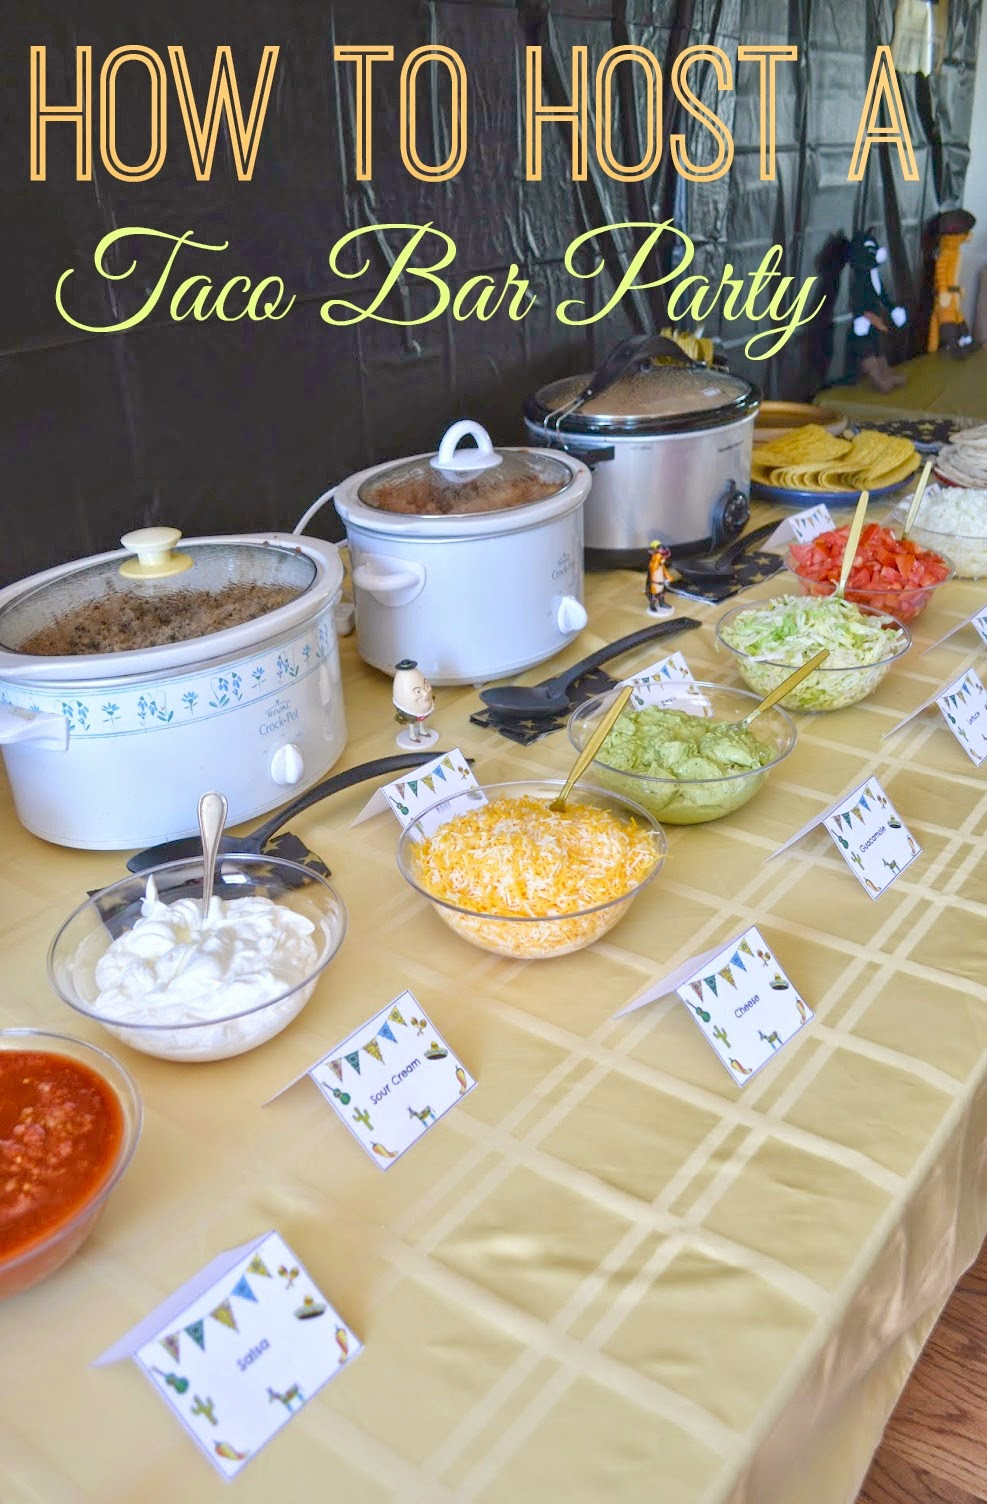 Lunch Ideas For Graduation Party
 DIY Taco Bar Party Table Tents Free Printables